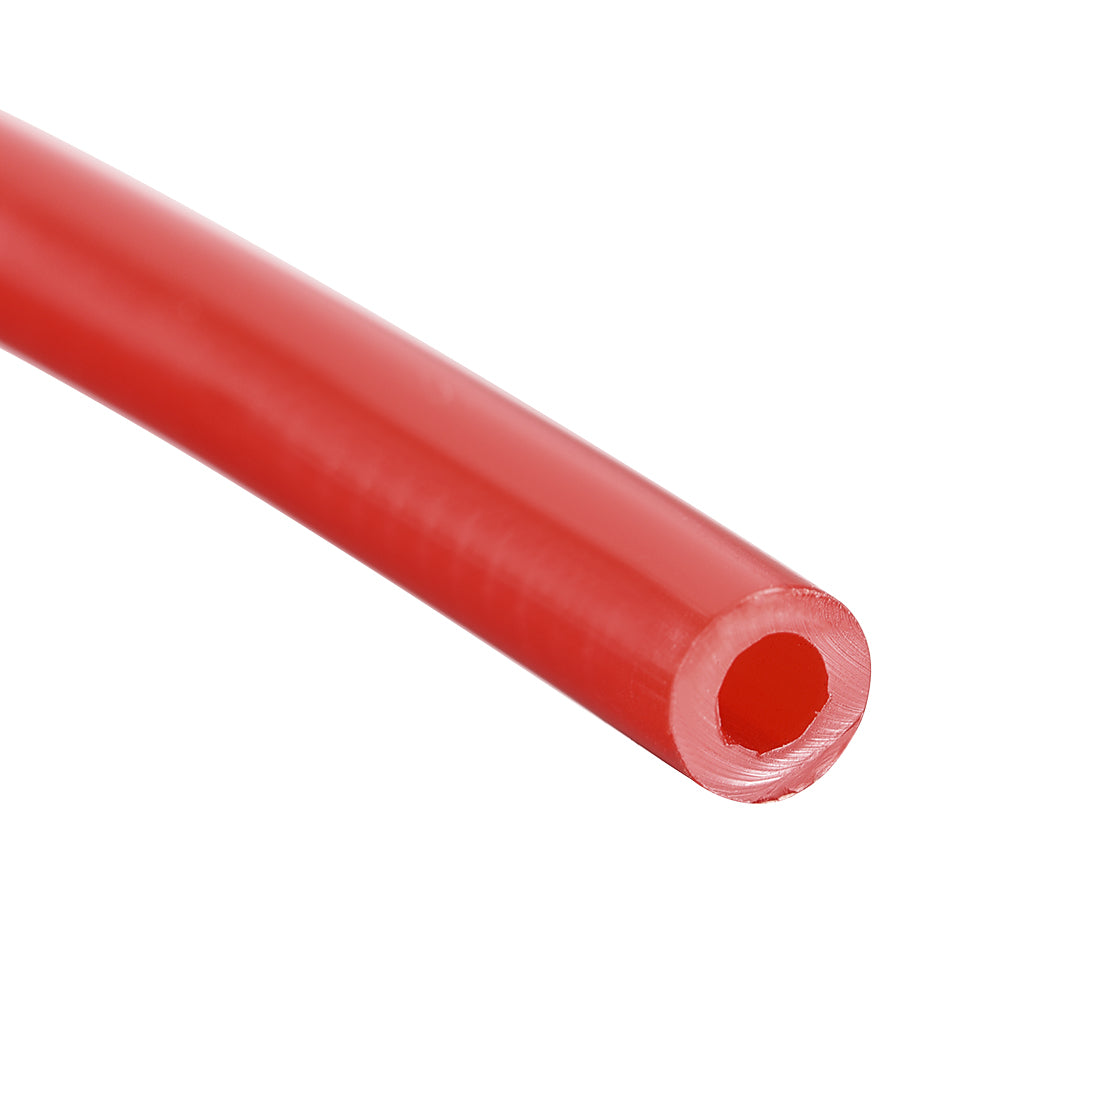 Uxcell Uxcell 4mm OD 2mm ID 2m Long PA12 Nylon Tube for Air Line Brake Fluid Transfer Red